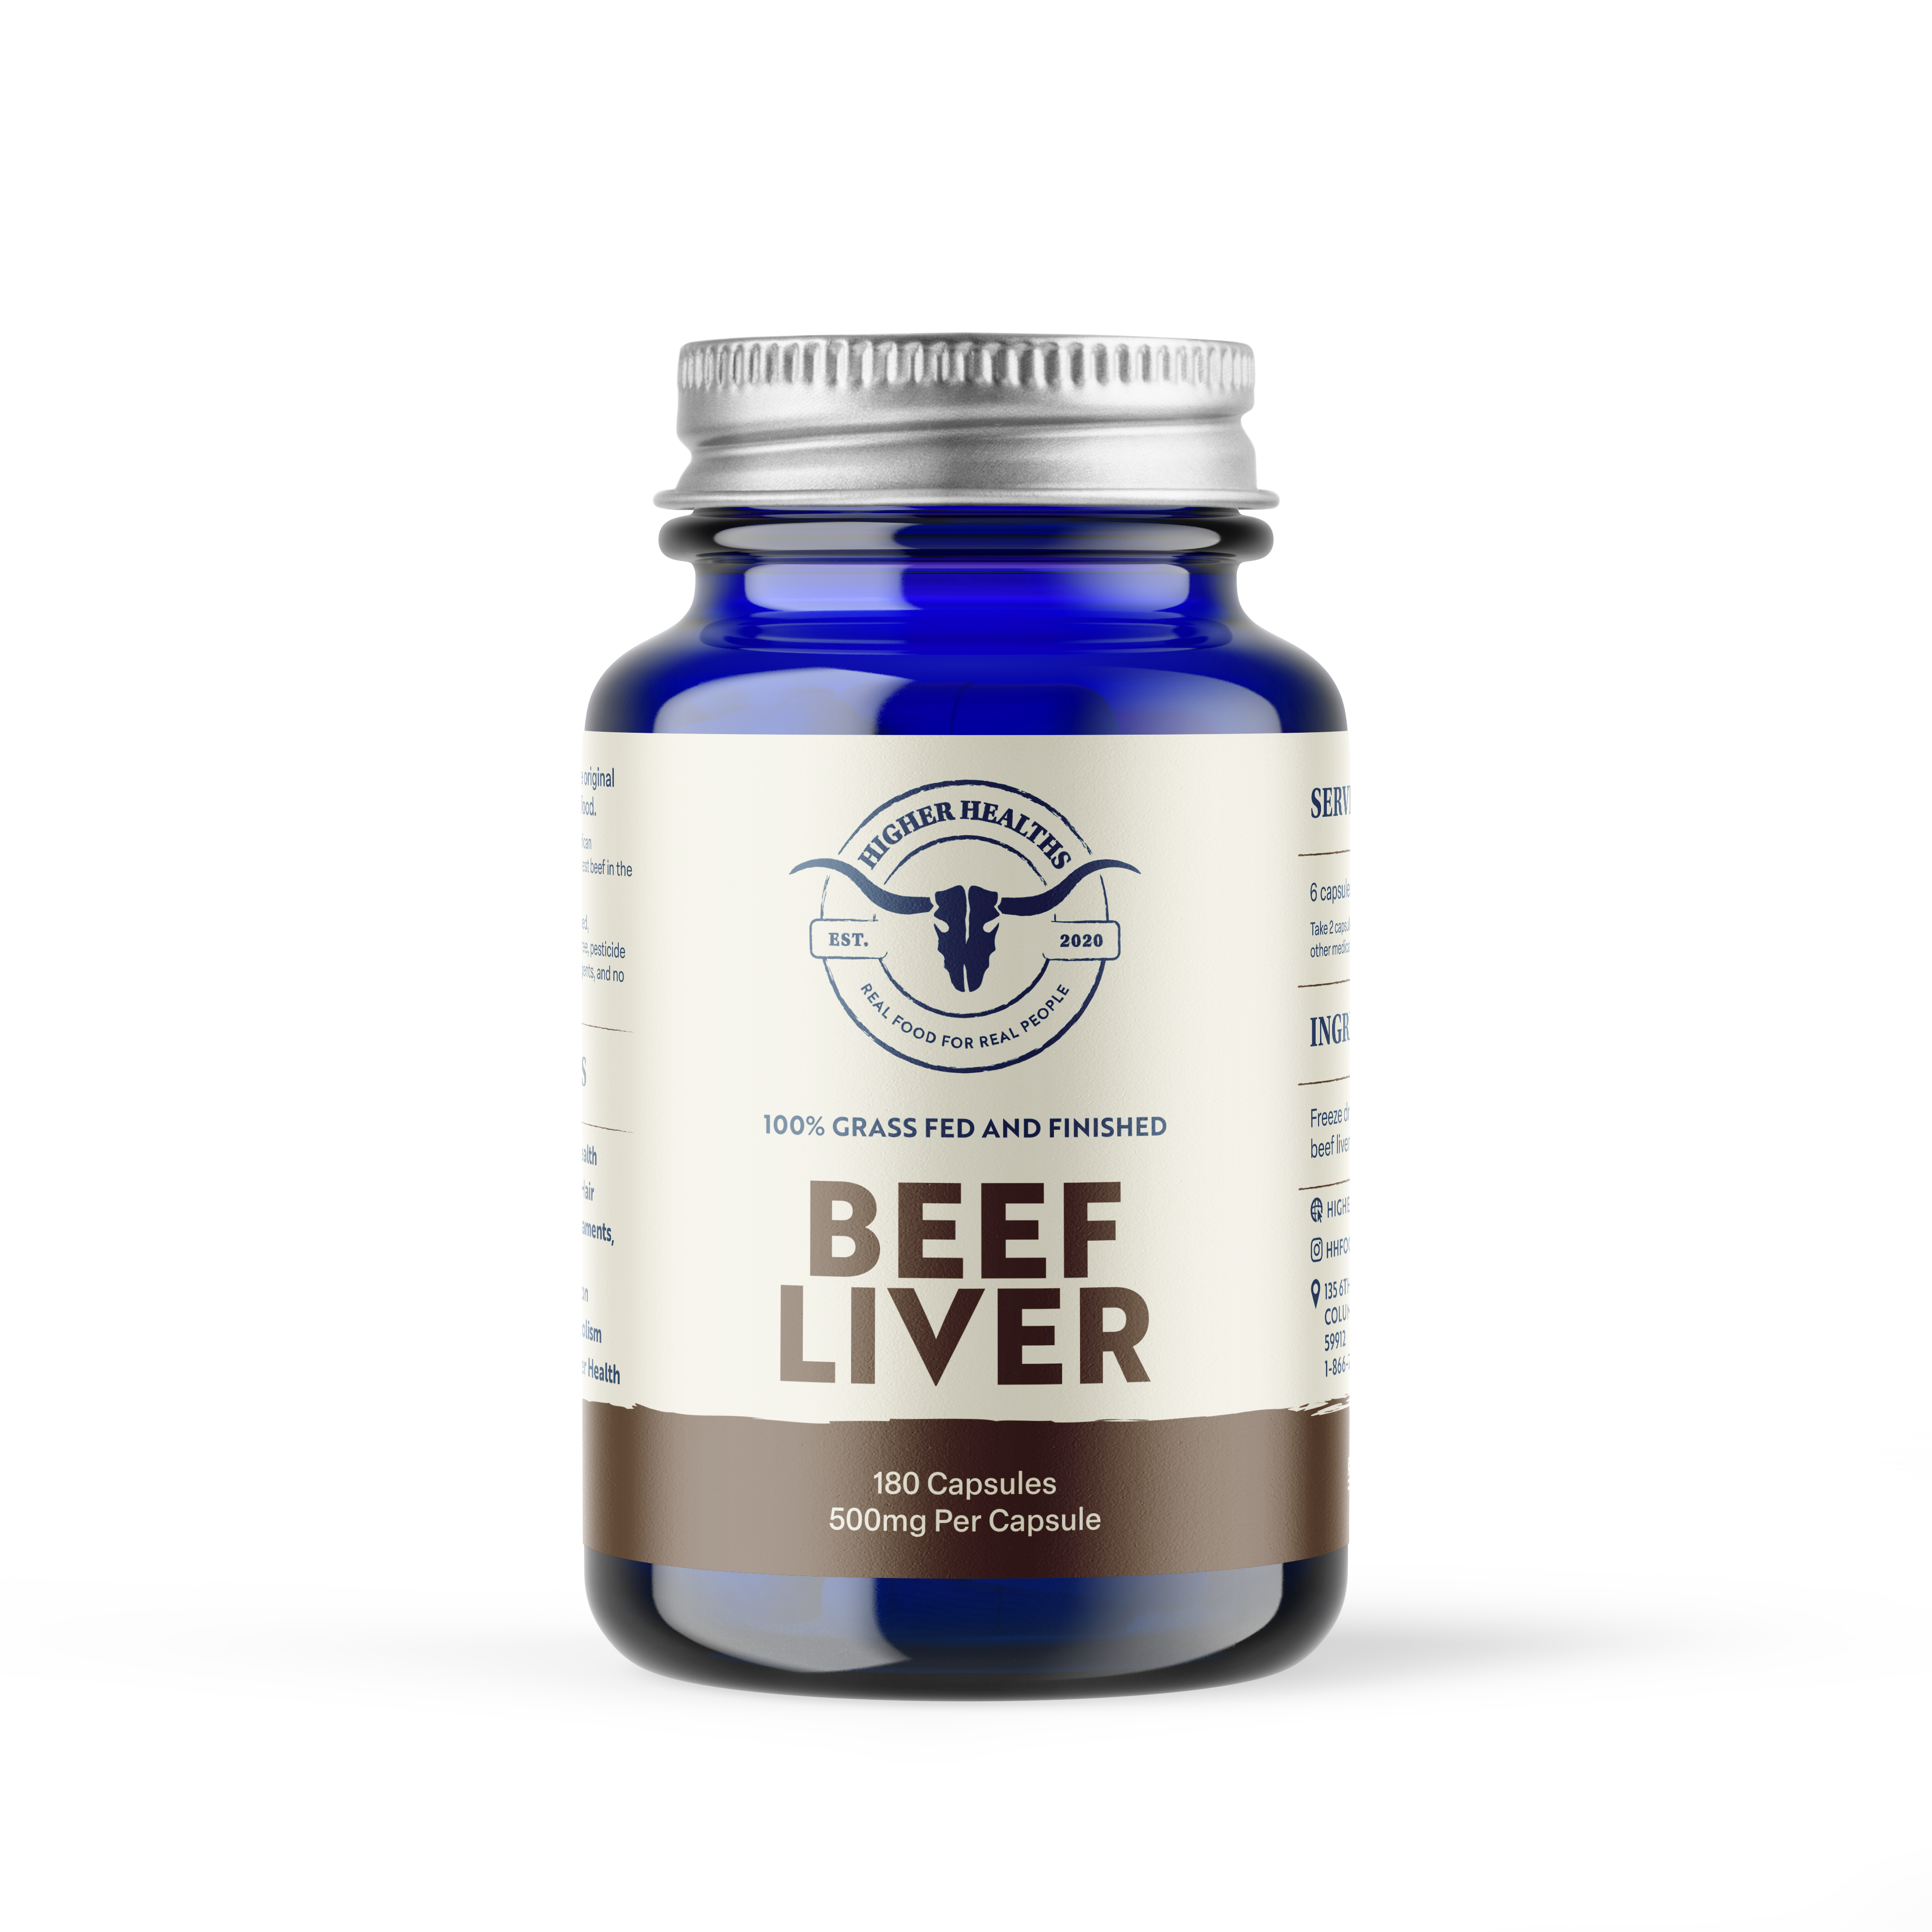 3 PACK - Beef Liver - Nature’s Multivitamin